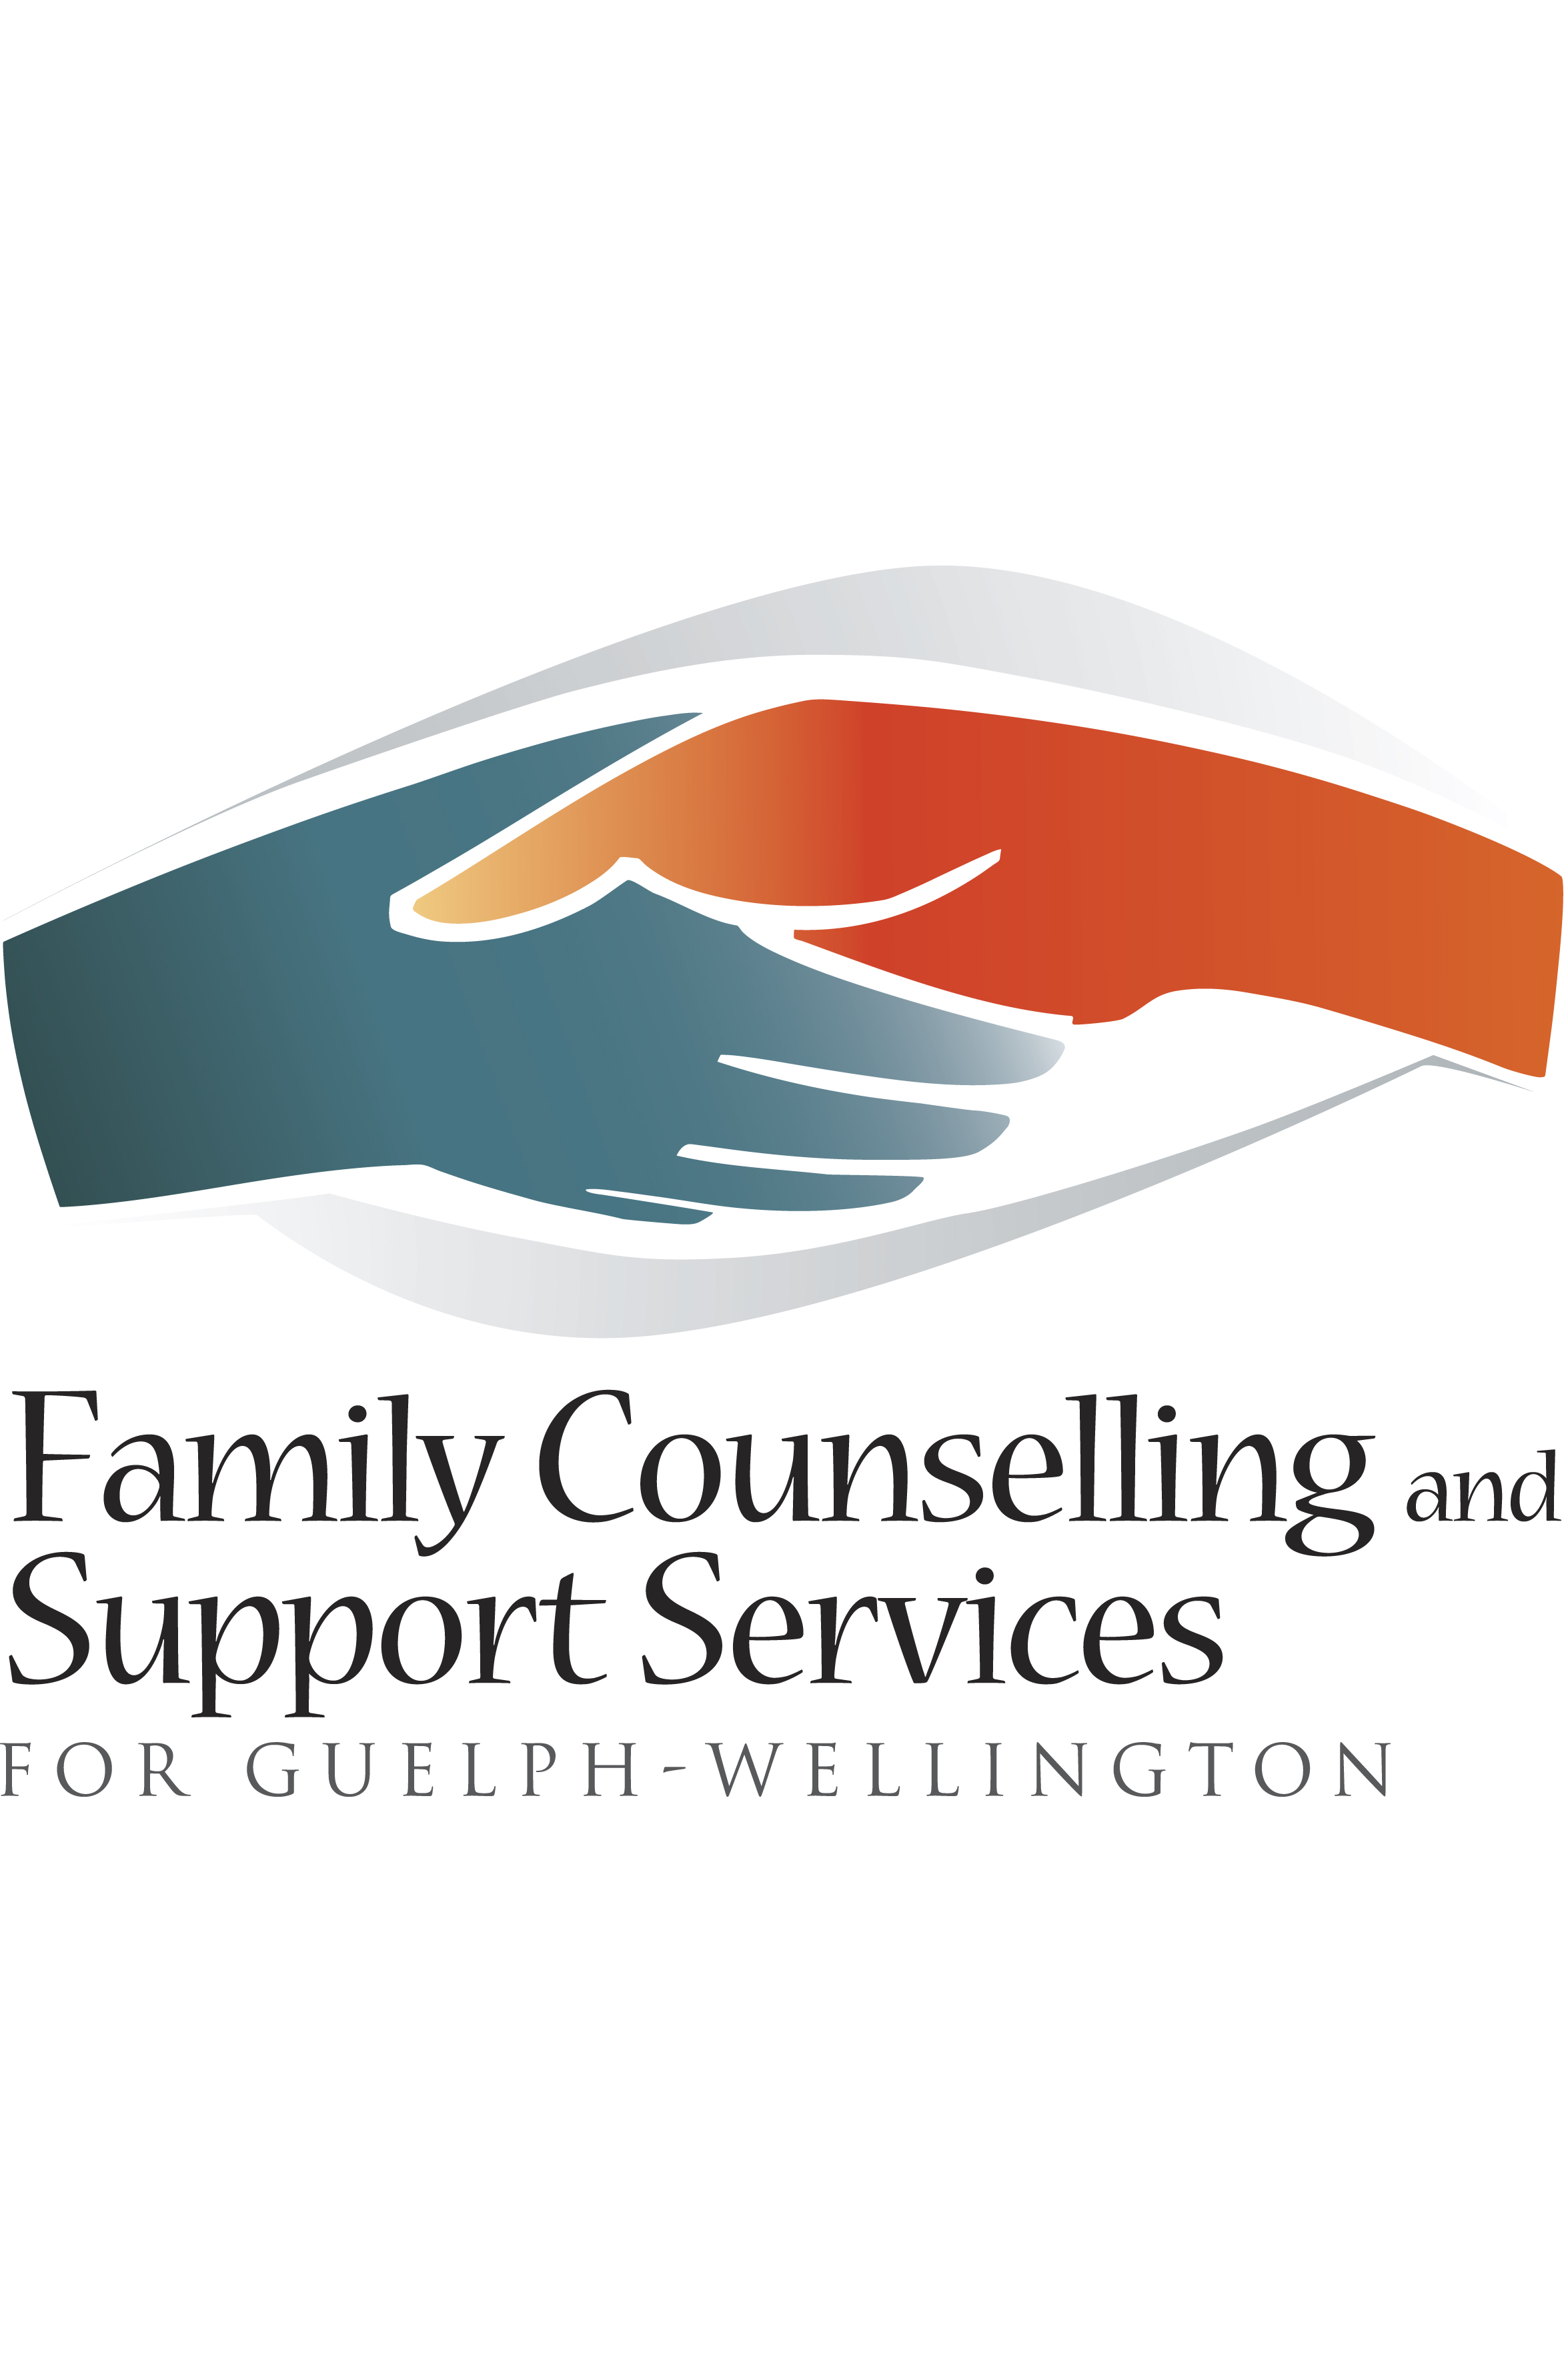 Family Counseling and Support Services of Guelph and Wellington logo